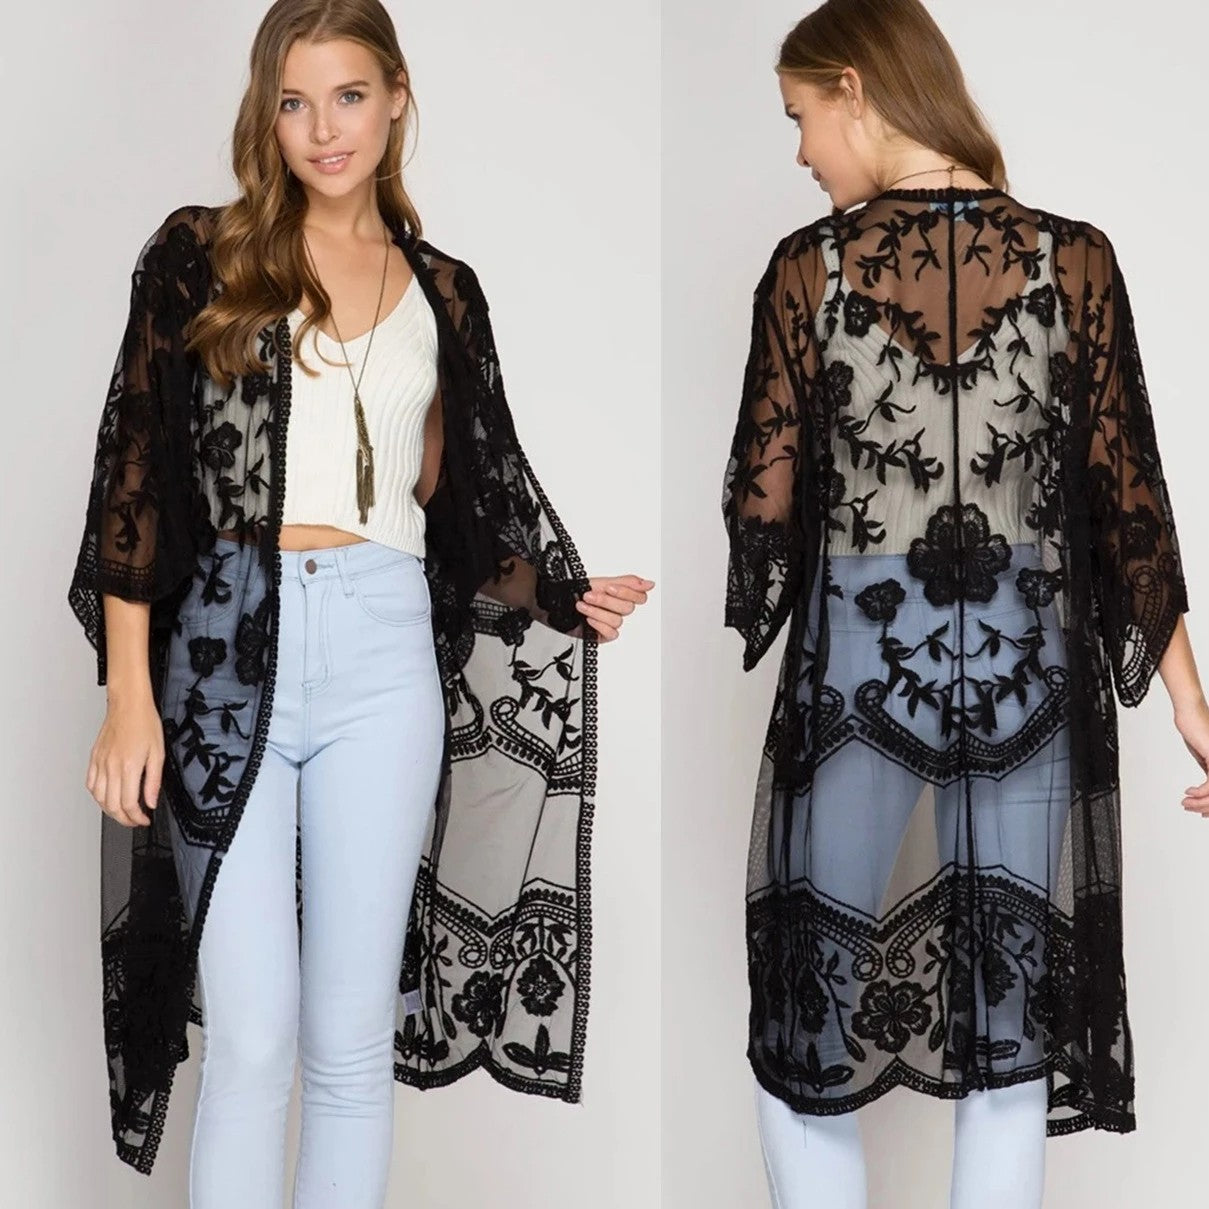 Lace Sheer mid-length Coverup